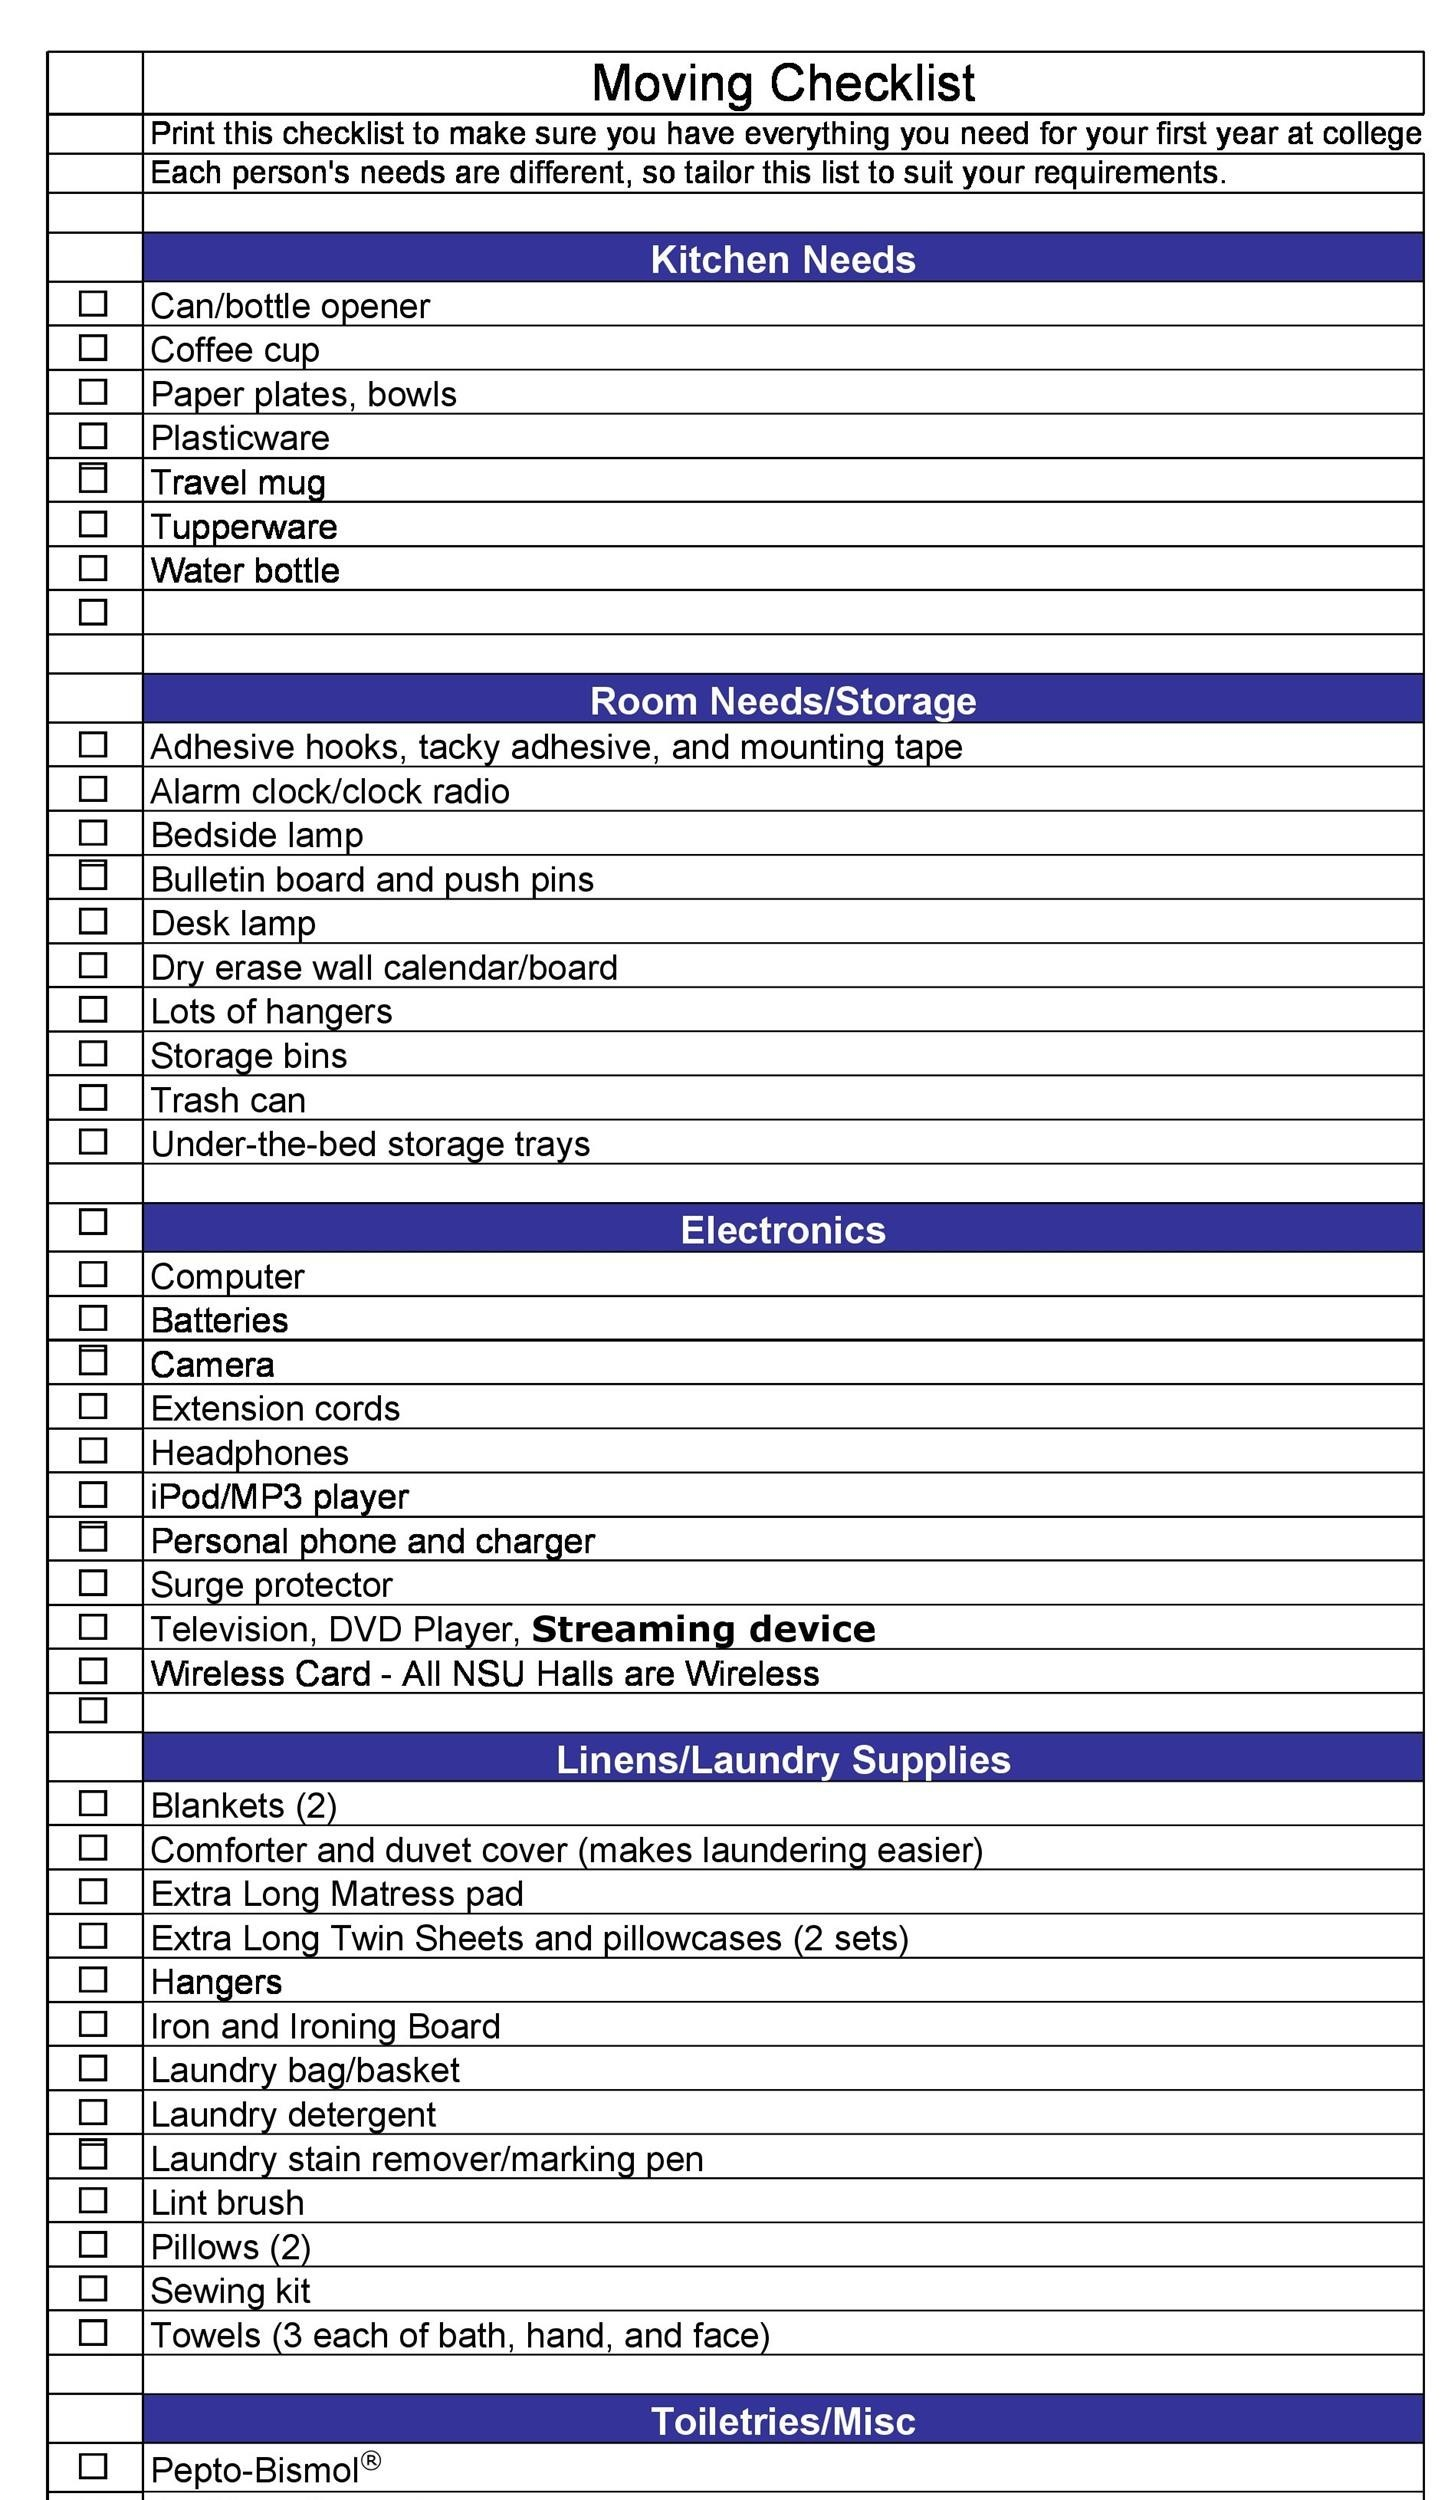 11 Great Moving Checklists [Checklist for Moving In / Out] ᐅ  Intended For Move In Checklist Template Inside Move In Checklist Template